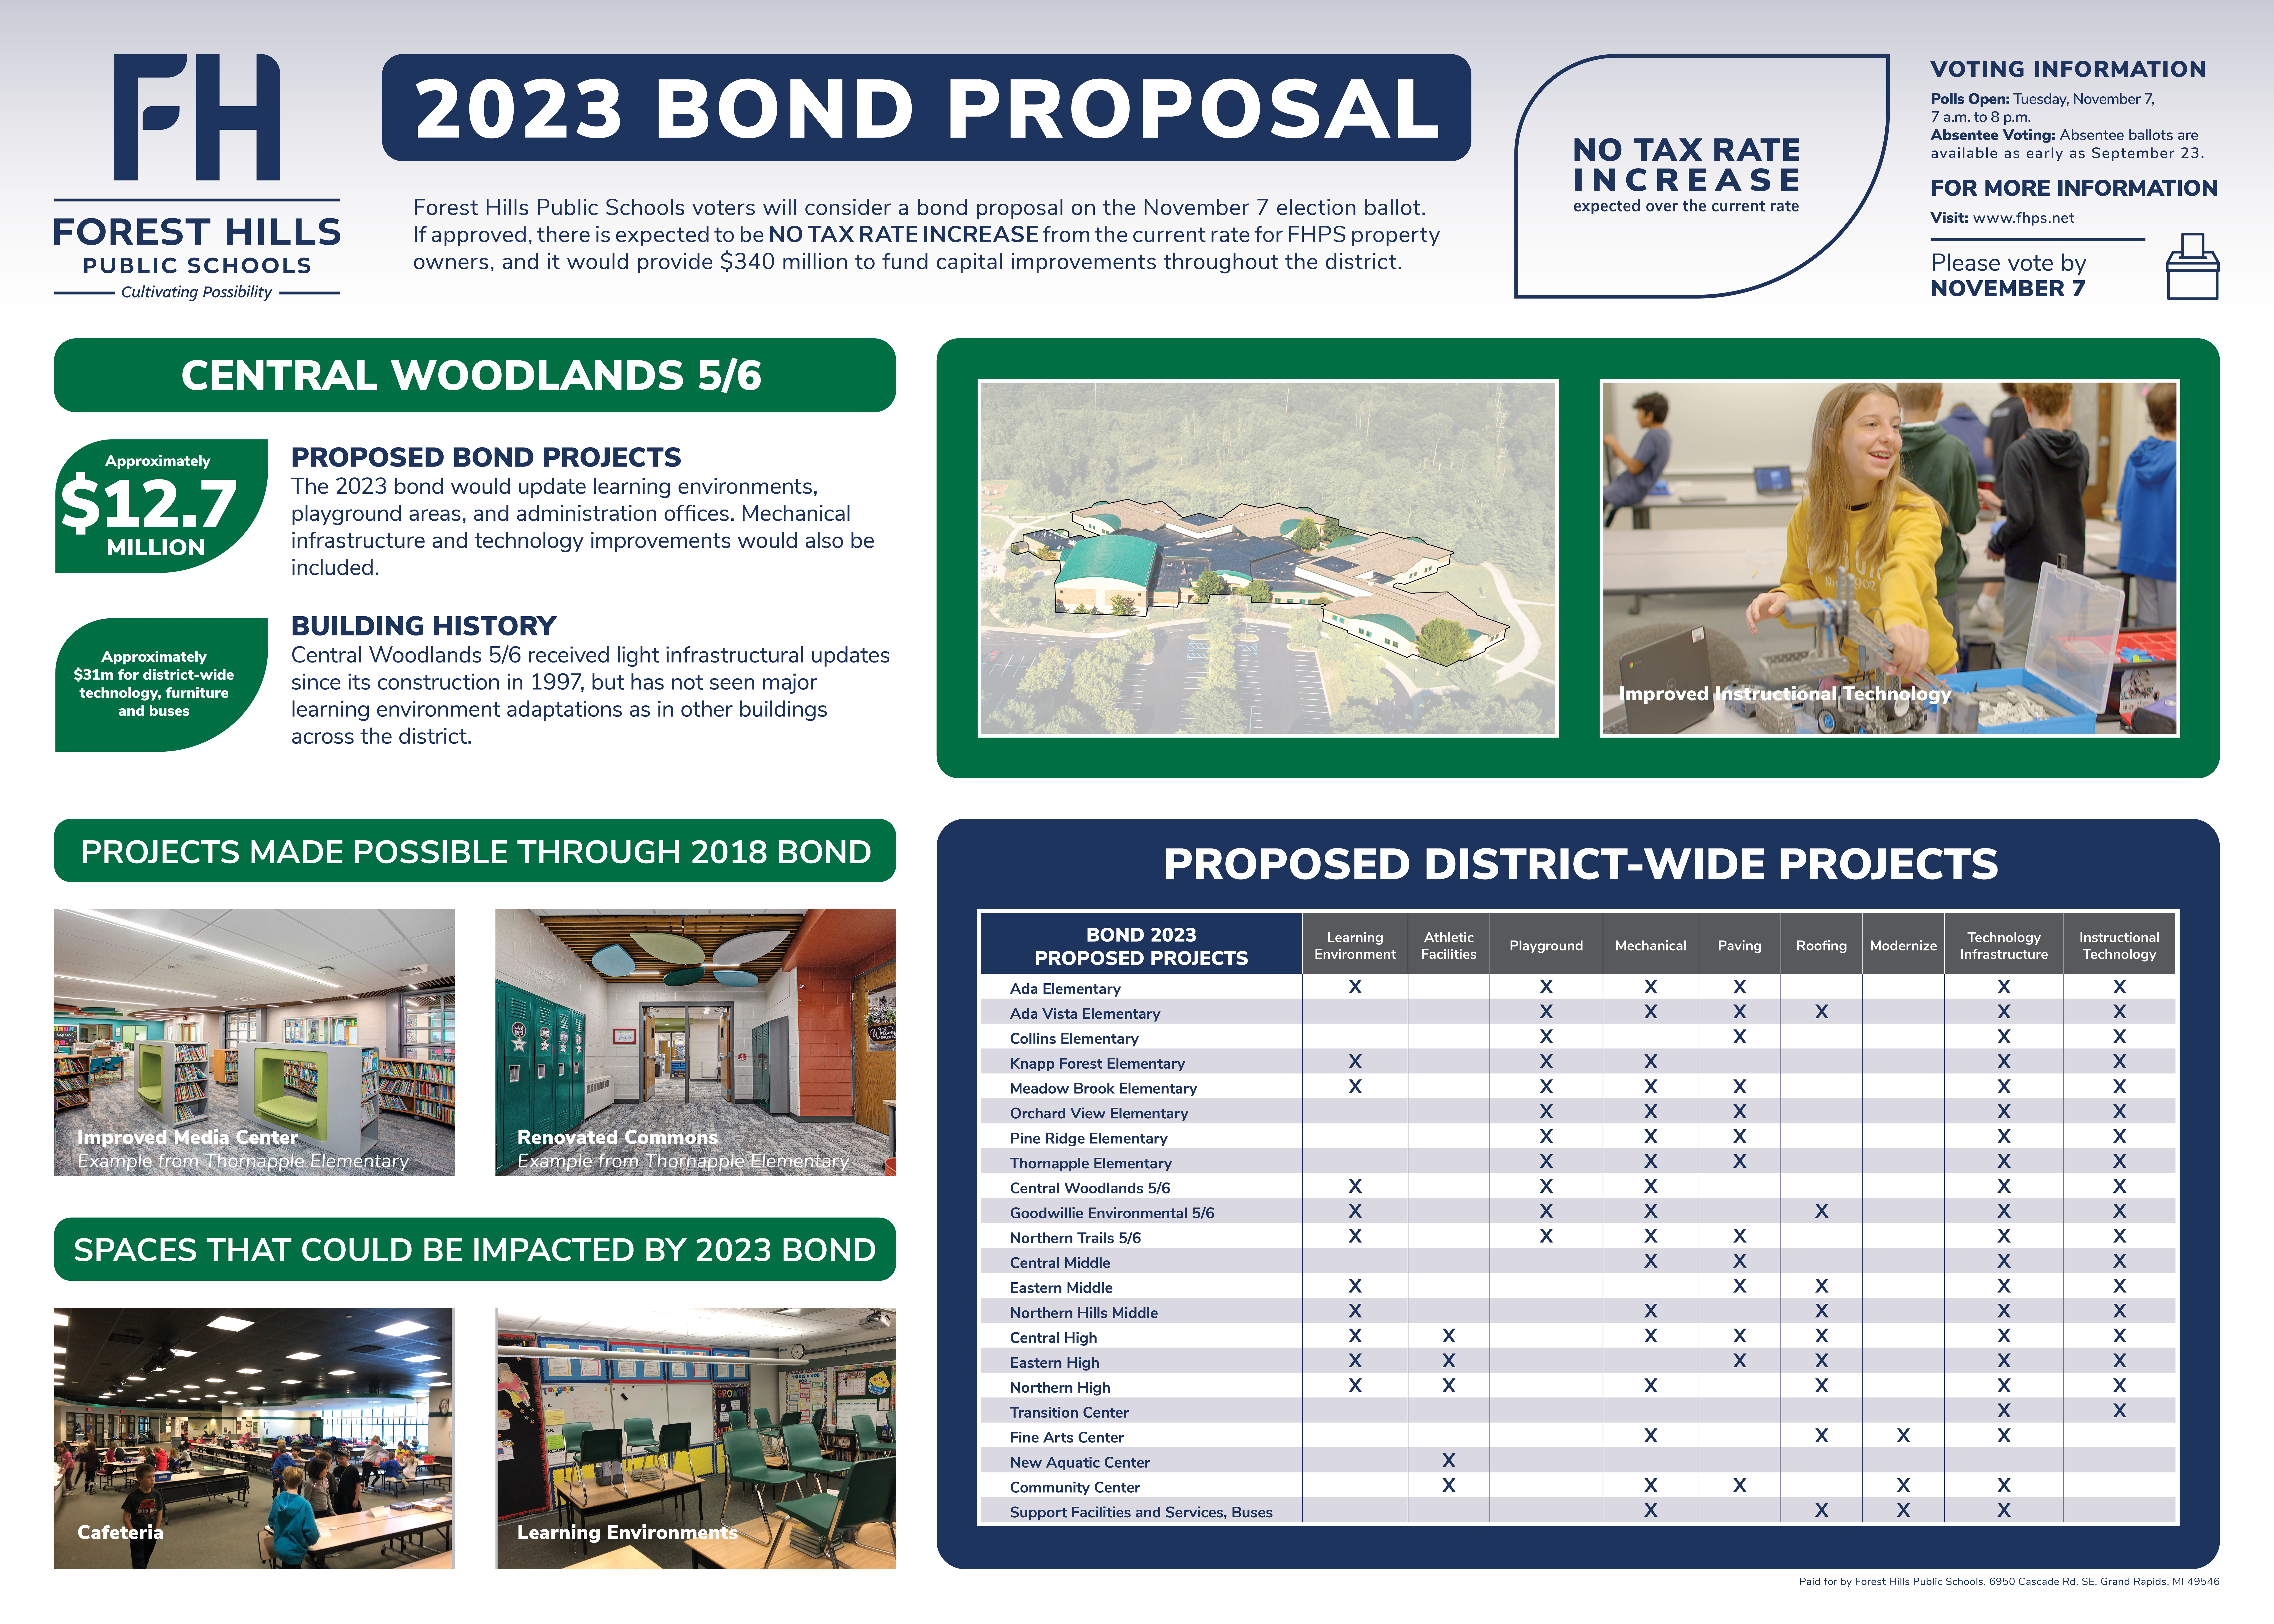 Central Woodlands and pictures of the existing building and bond project pictures from 2018 and spaces that could be impacted by the 2023 bond.